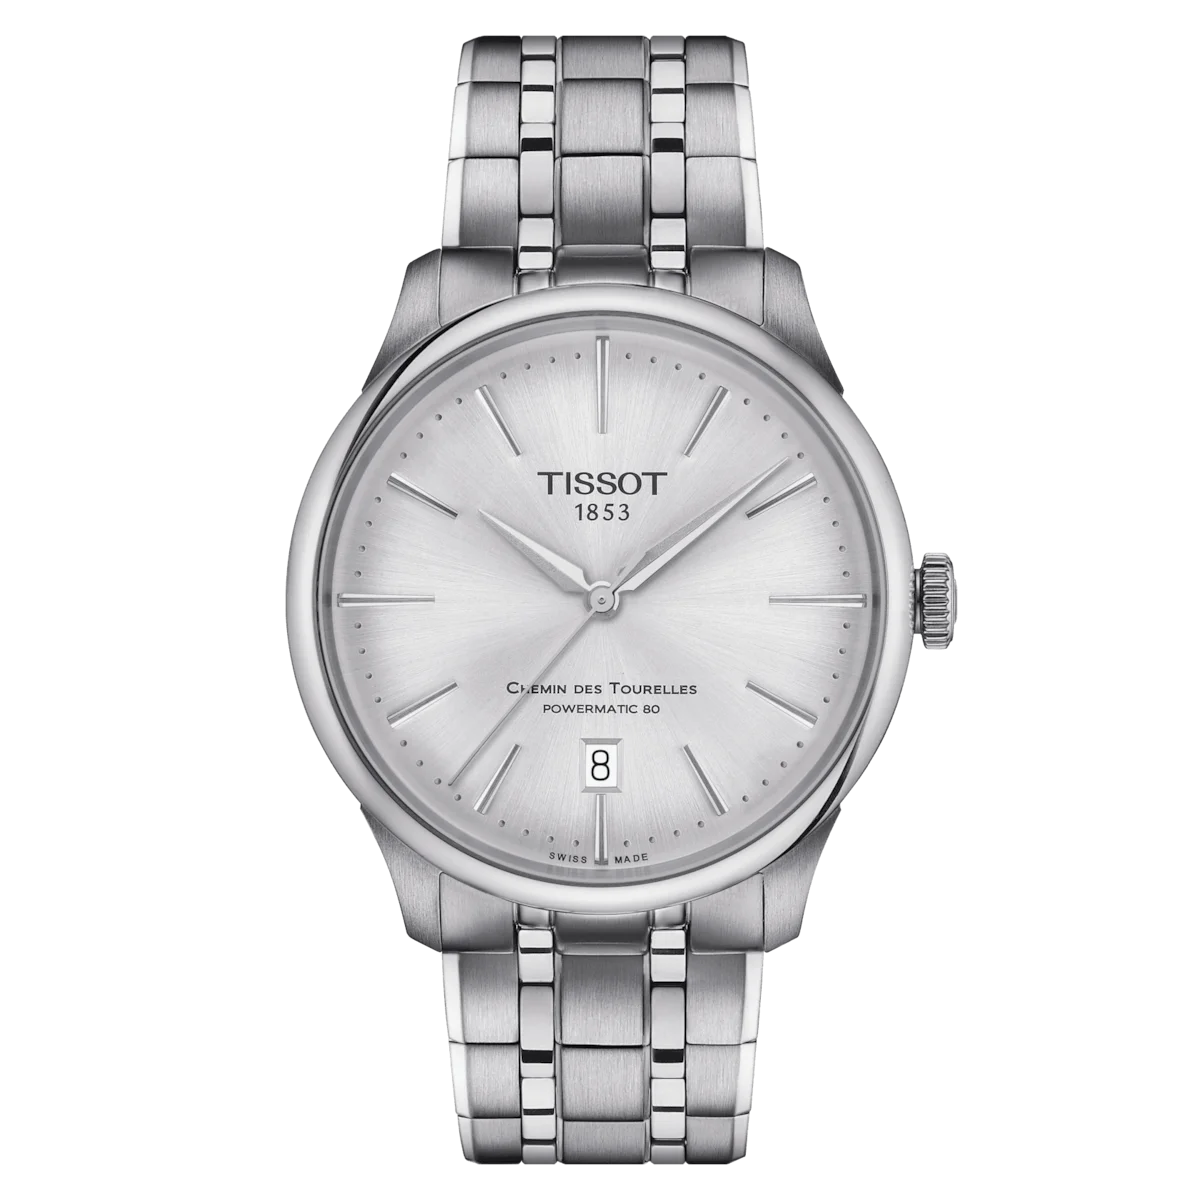 Tissot Chemin Des Tourelles Powermatic 80 Silver Dial Round Watch in stainless steel case. Date function at 6 o'clock position on stainless steel bracelet. T139.807.11.031.00 - Front Image